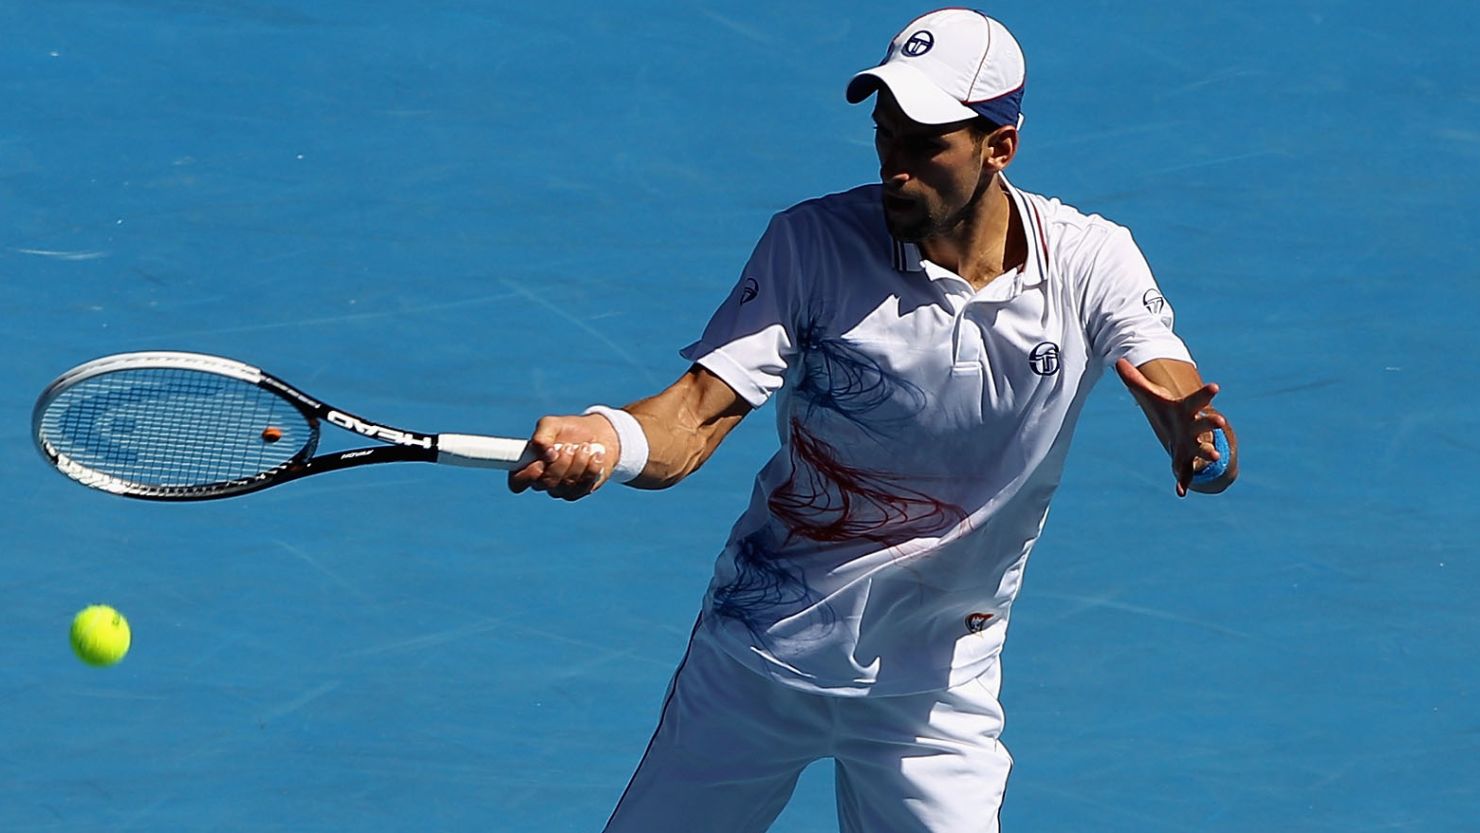 World No.1 and top seed Novak Djokovic has won the Australian Open in each of the last two seasons.